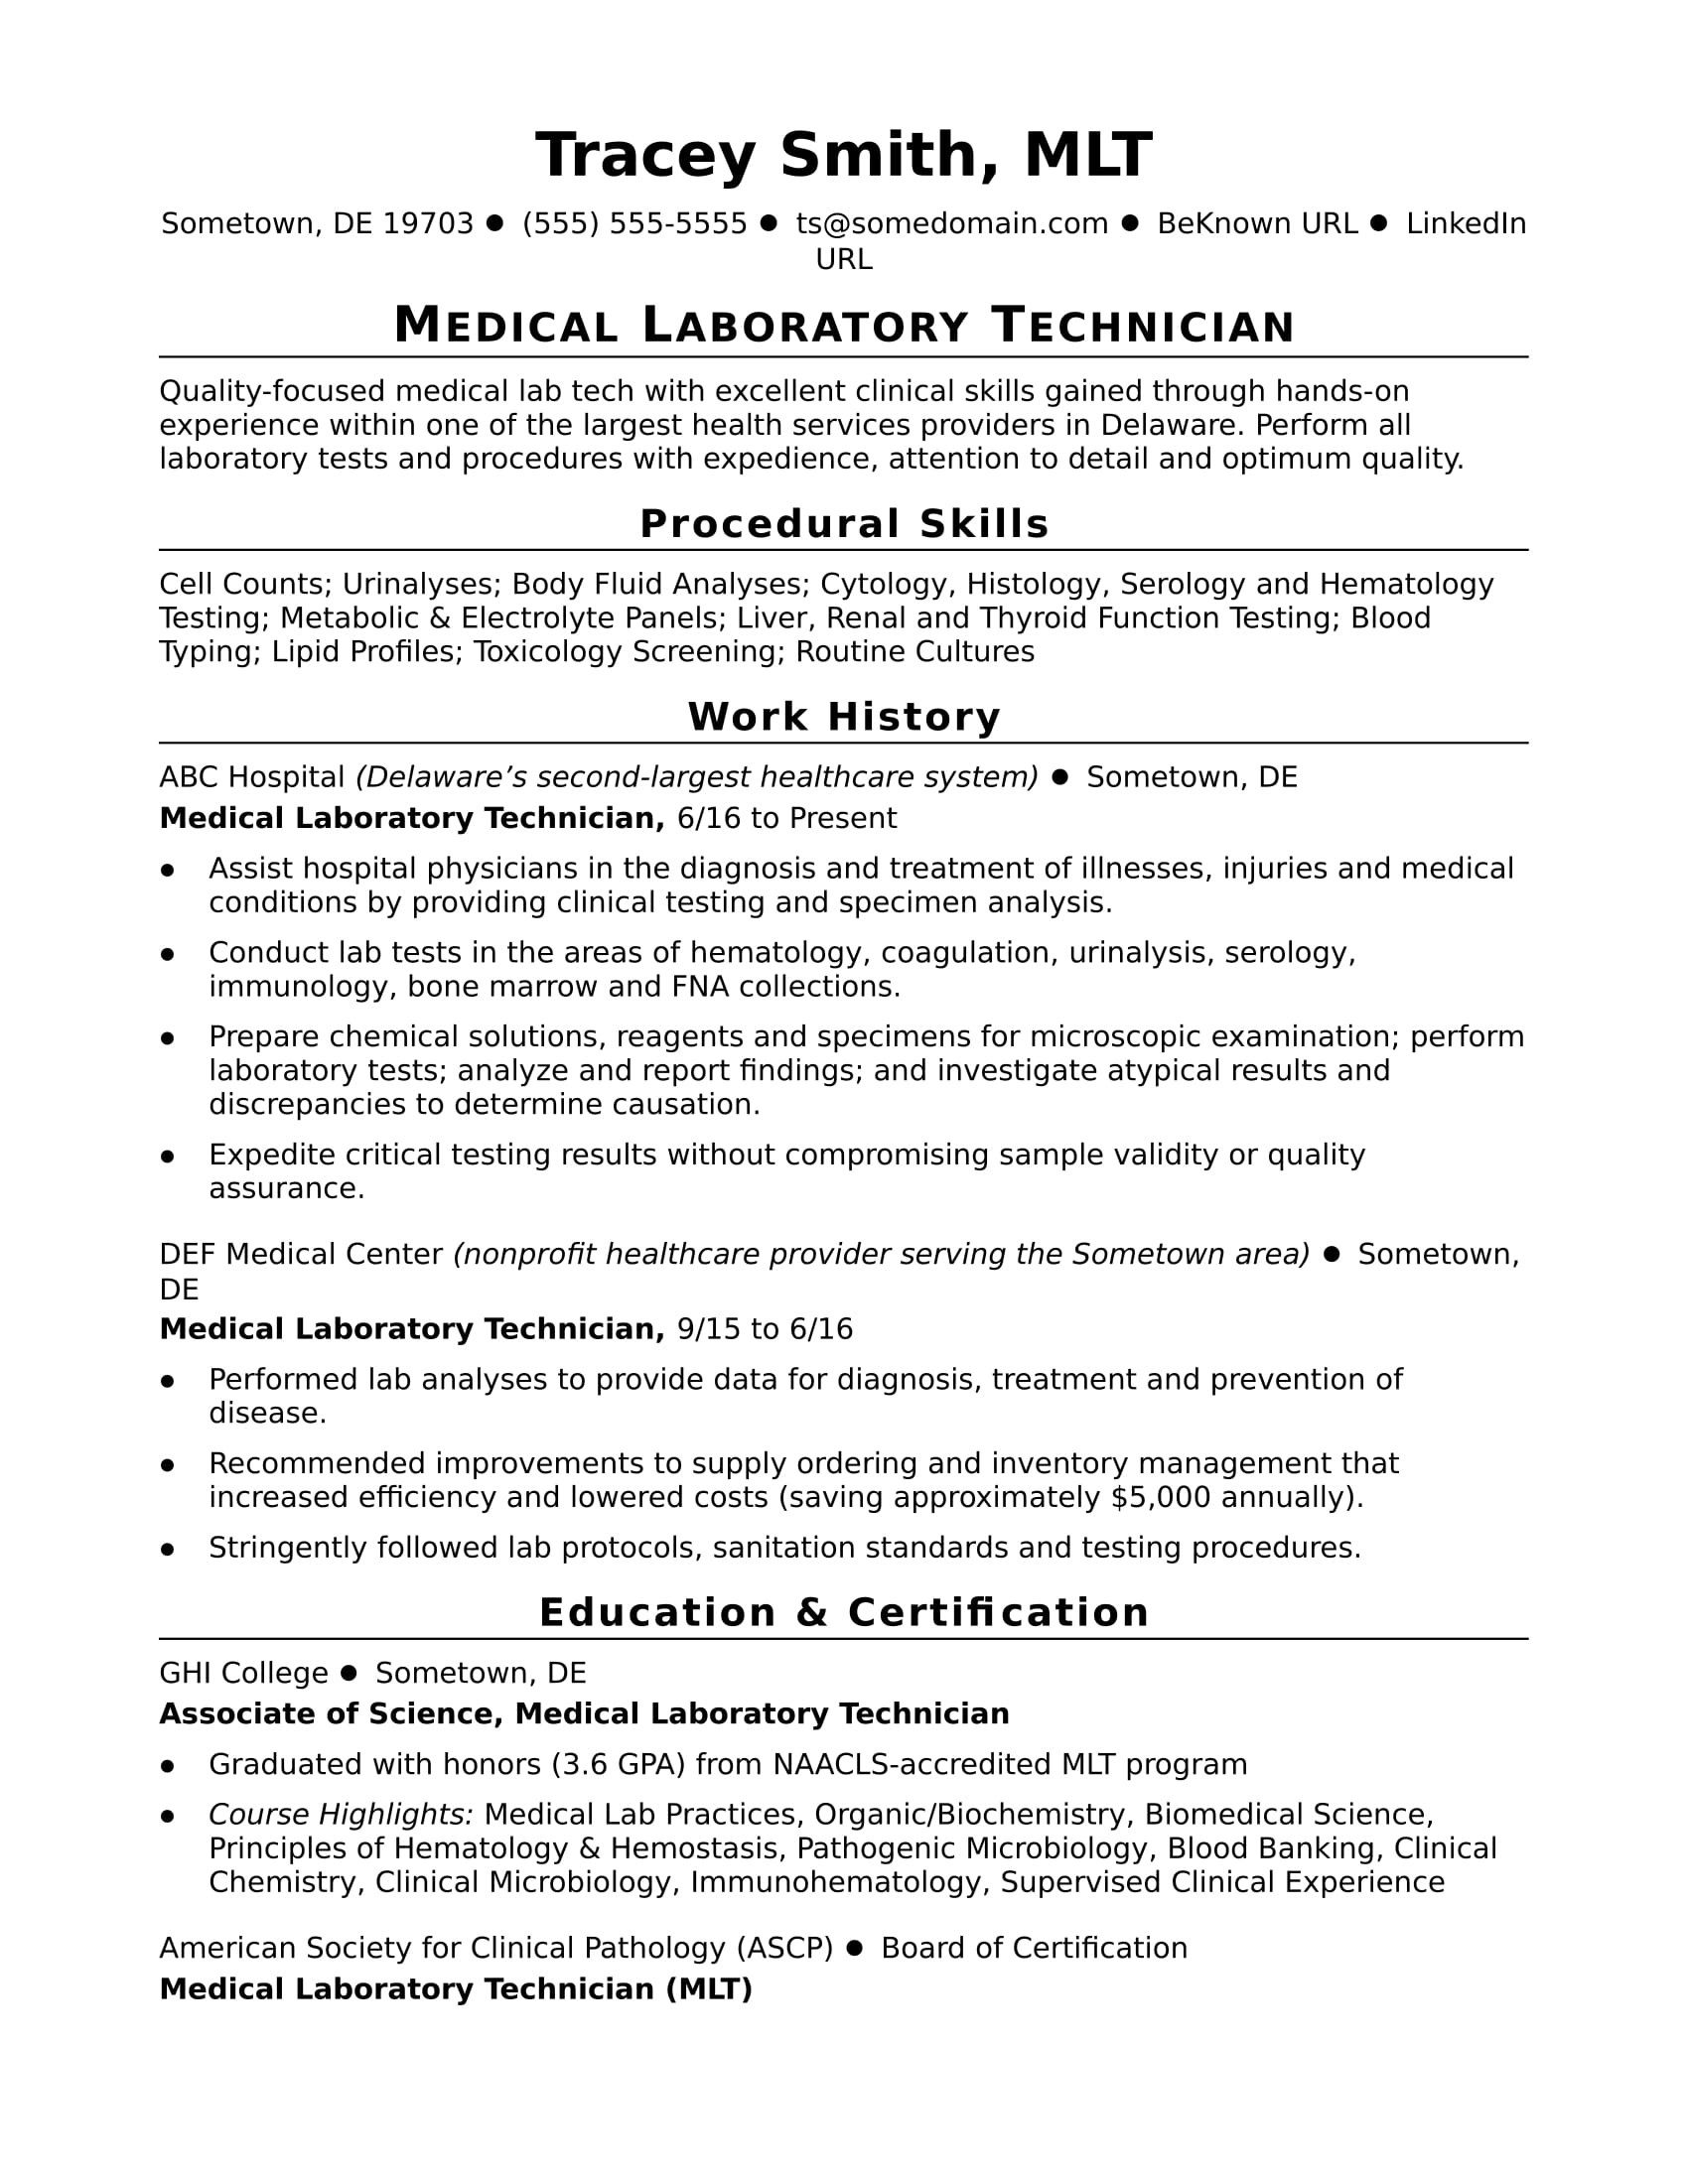 Sample Resume for Lab Technician Entry Level Entry-level Lab Technician Resume Sample Monster.com